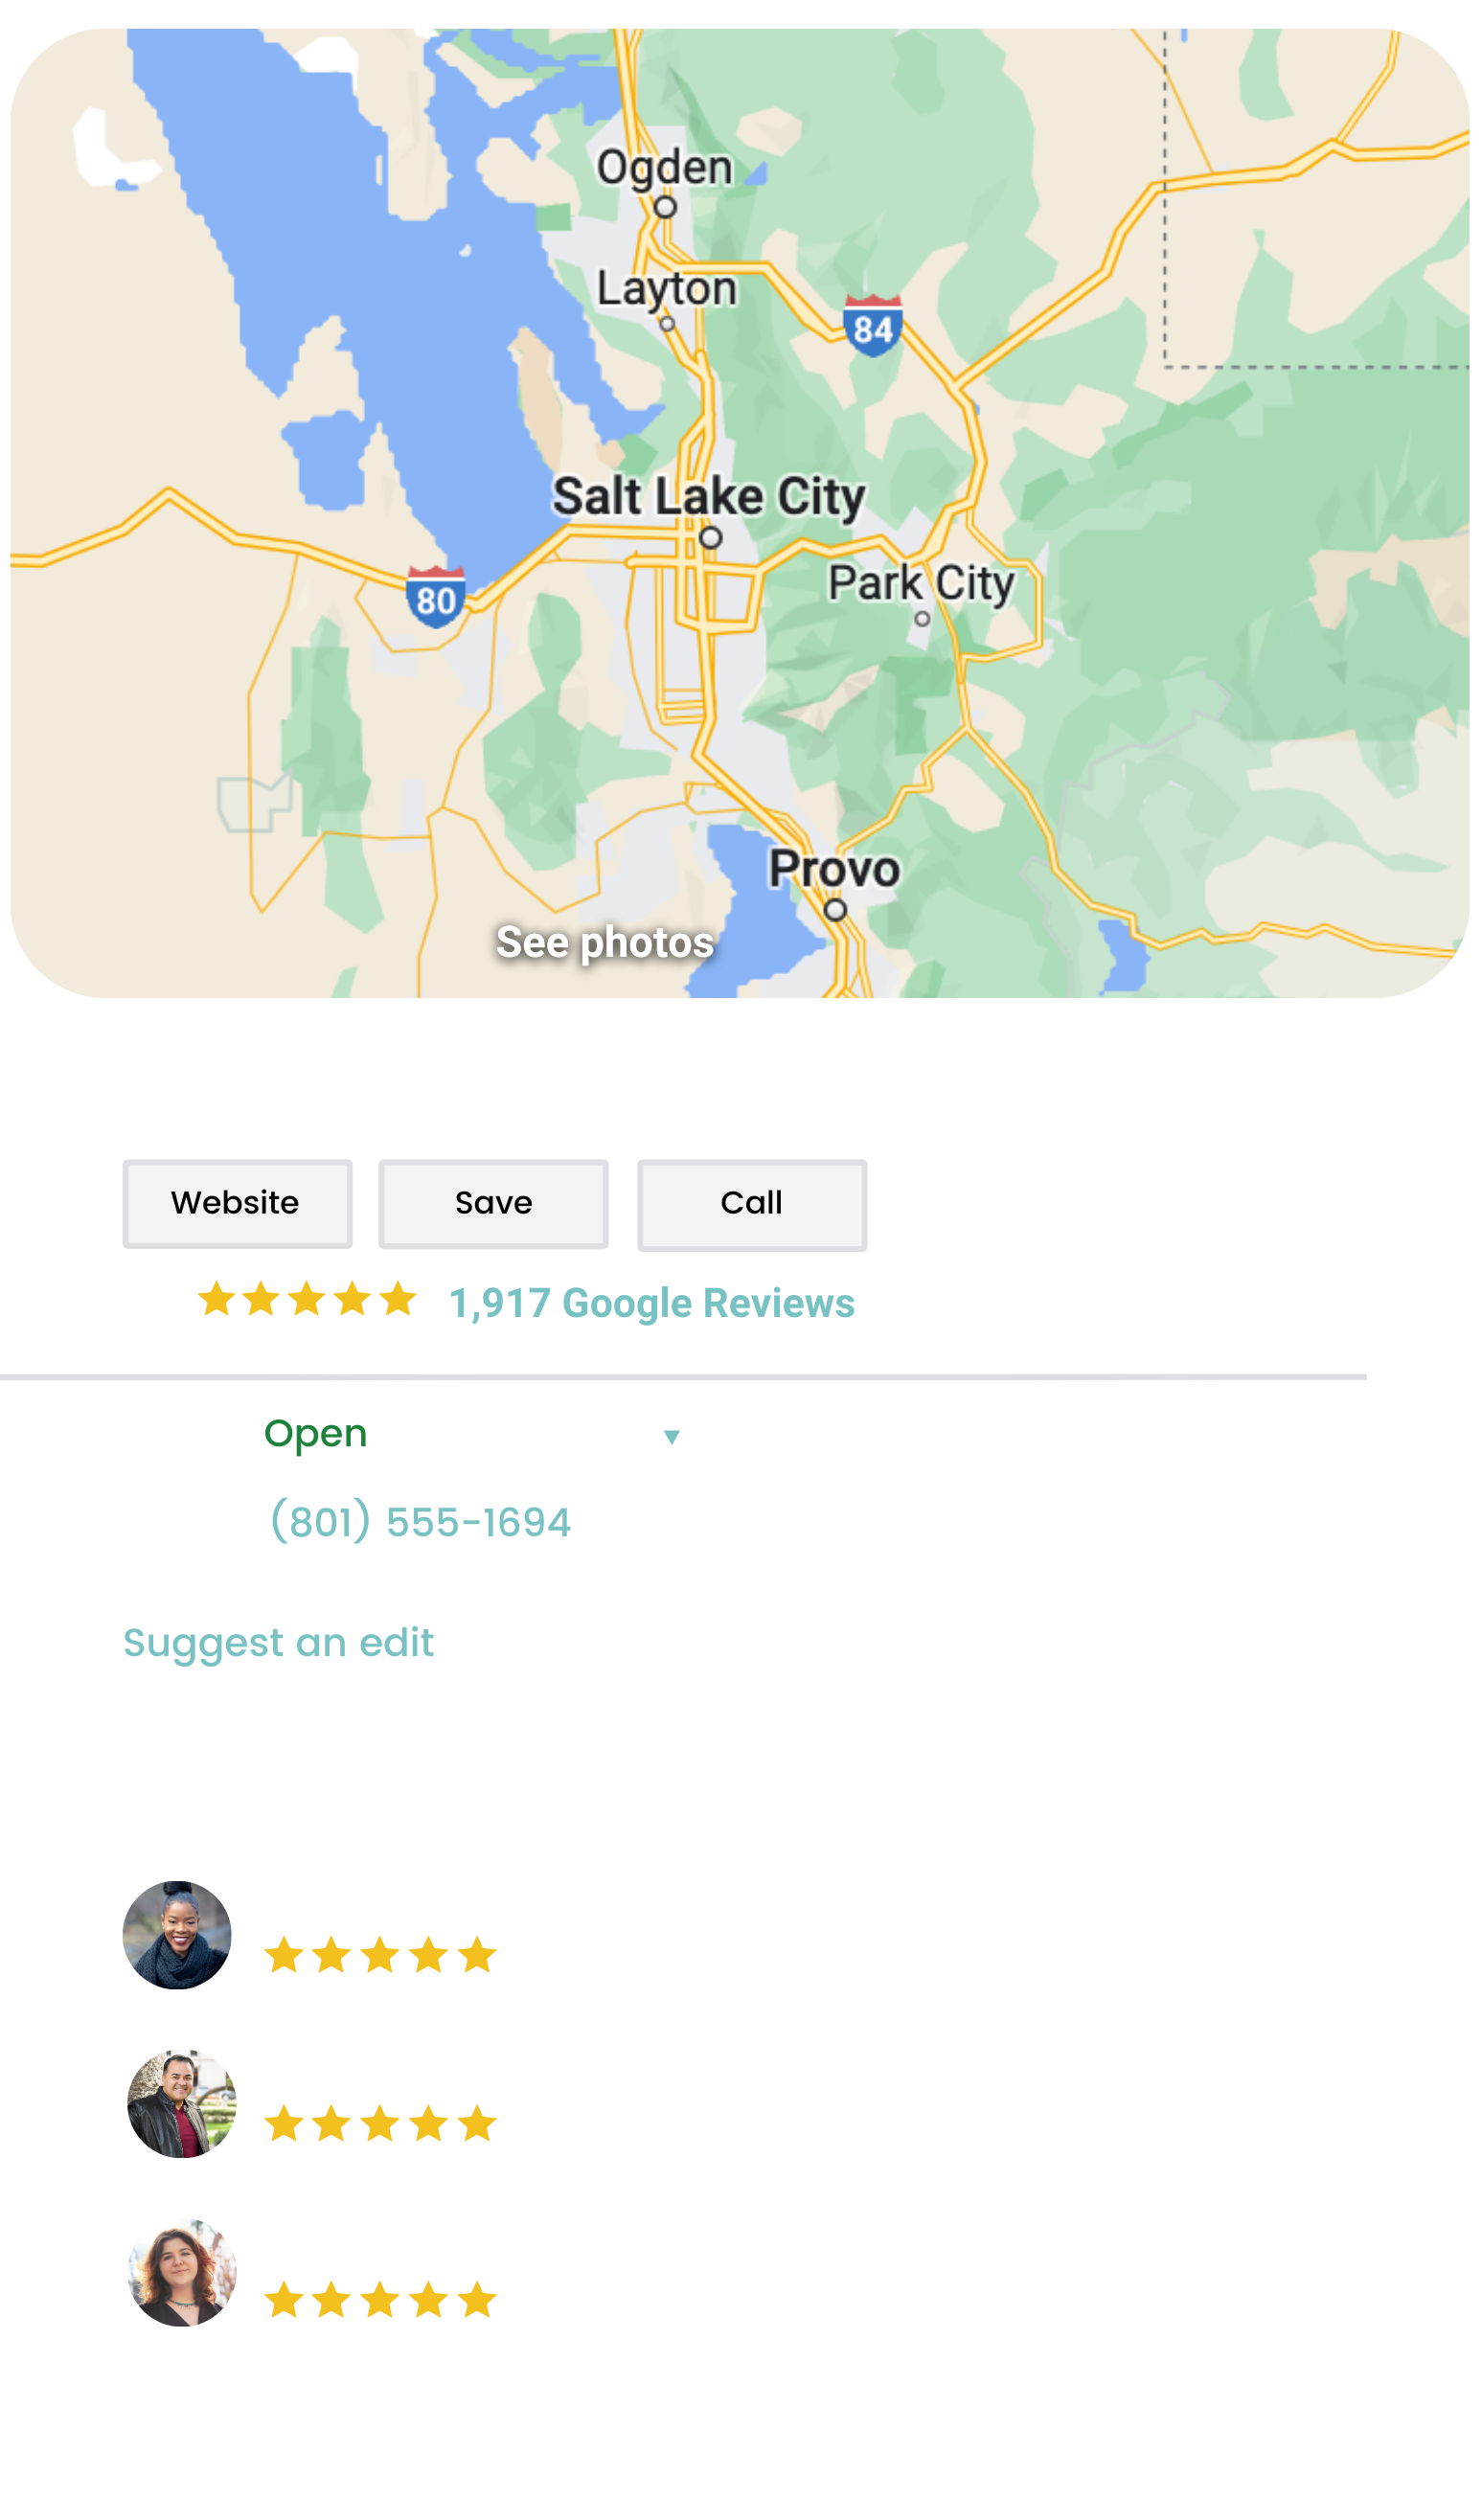 Local Marketing. 5-Star Reviews. We support local small businesses and nonprofits.